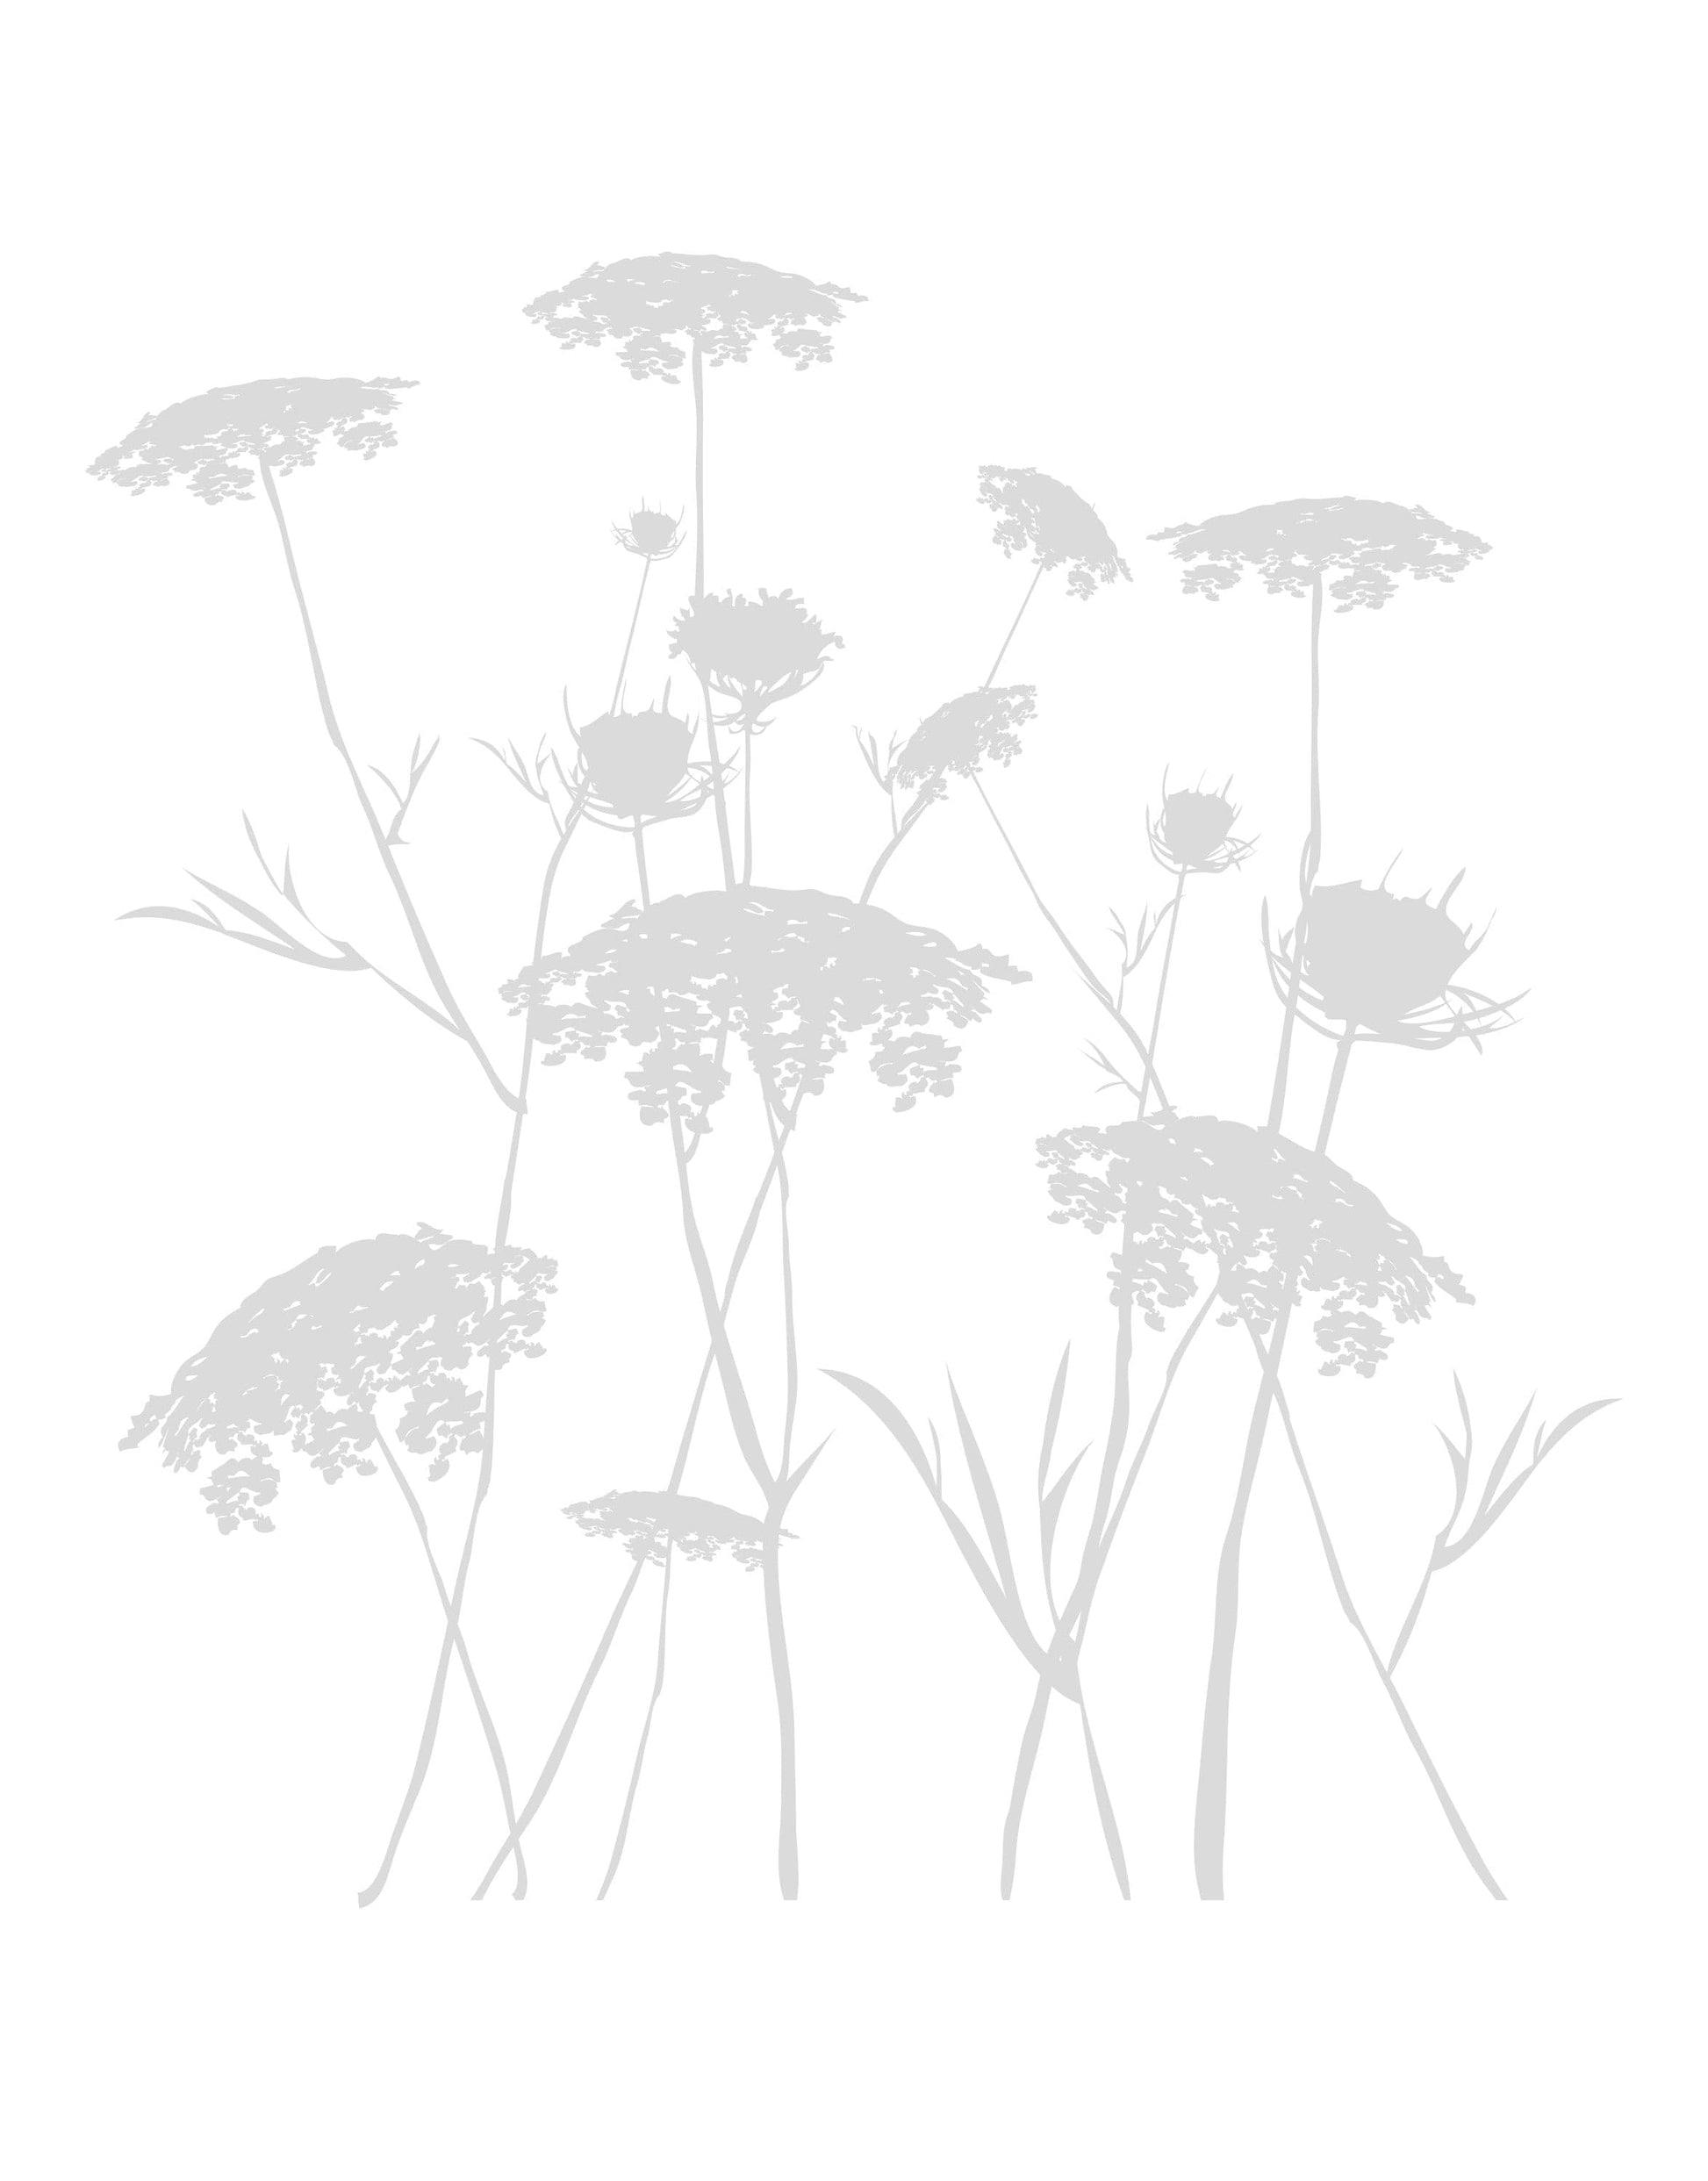 Queen Anne's Lace Flower Wall Decal. #AC218 – StickerBrand